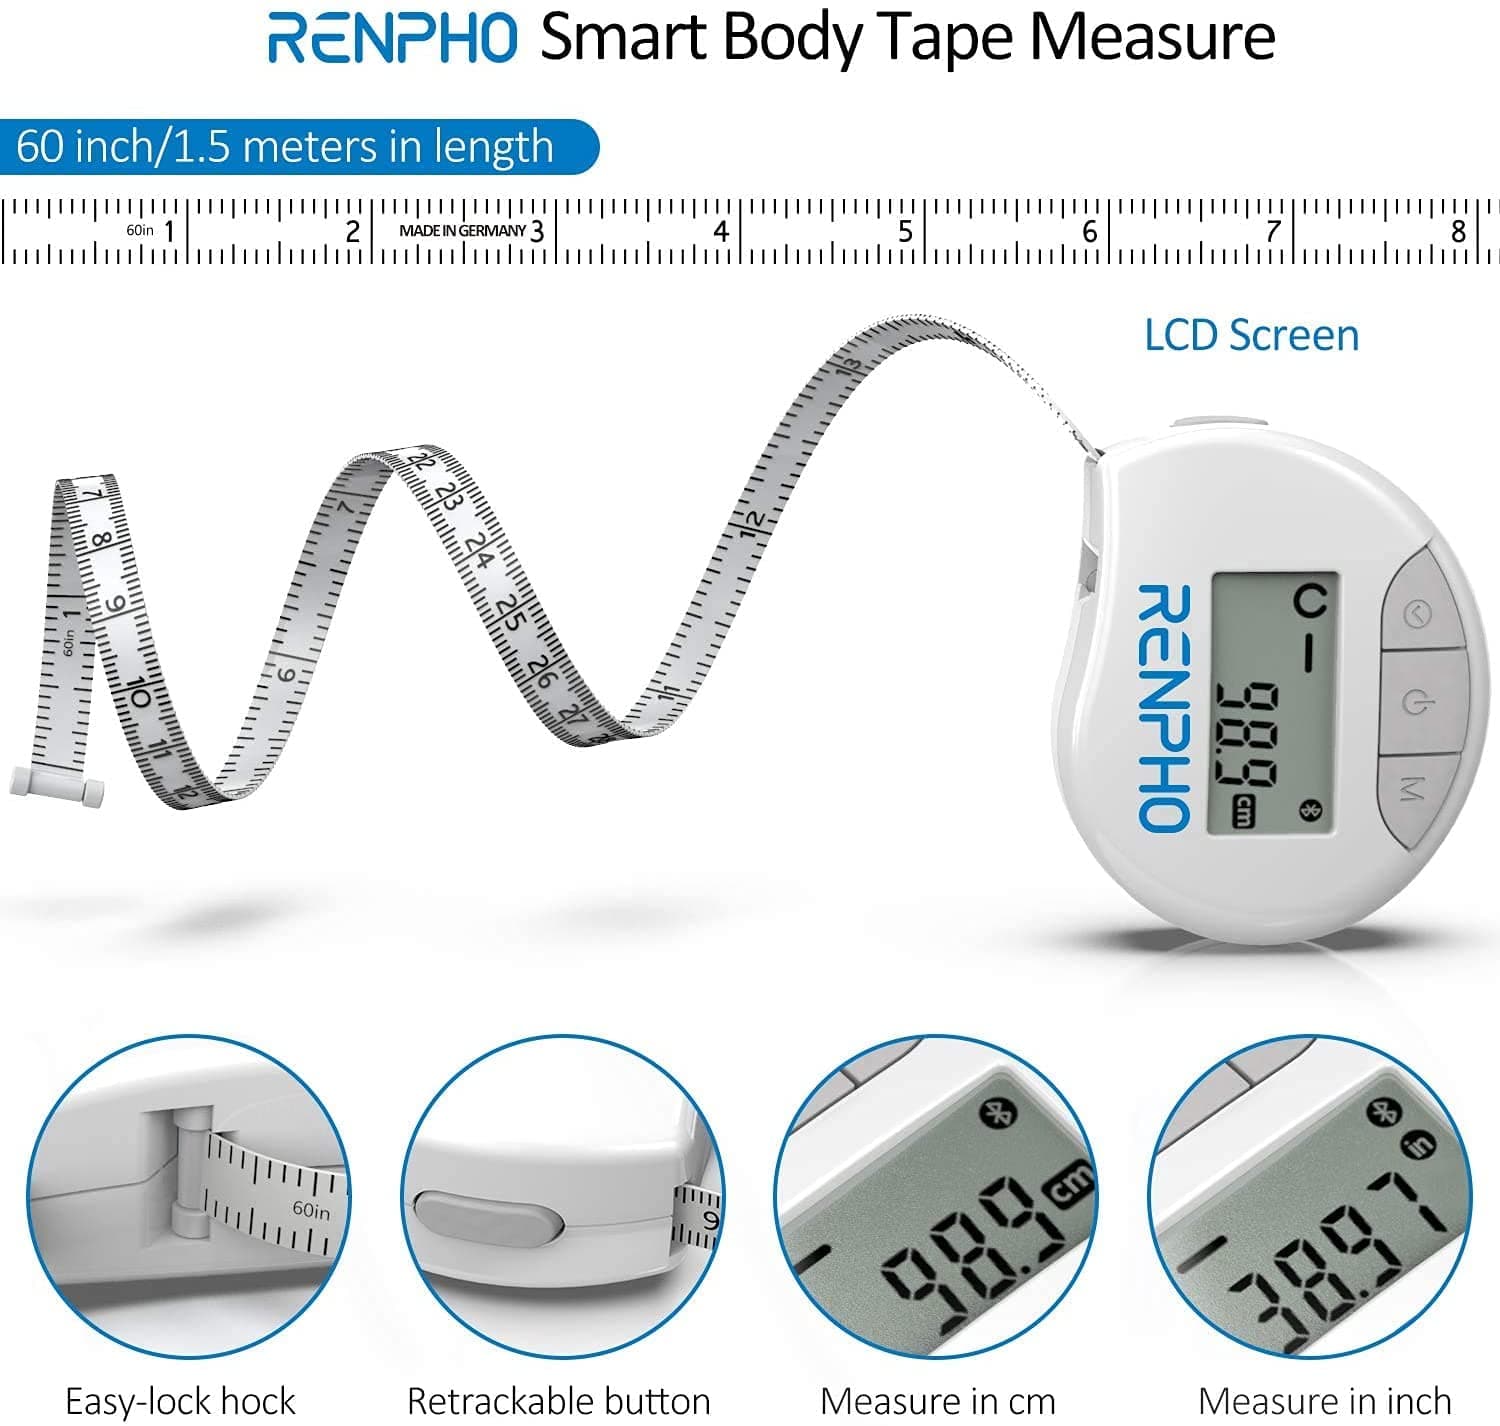 RENPHO Tape Measure for Body, Smart Bluetooth Digital Body Measuring Tape  for Weight Loss, Body Fat Monitor, Muscle Gain, Fitness Bodybuilding,  Retractable, Measures Body Part Circumferences : : Home  Improvement